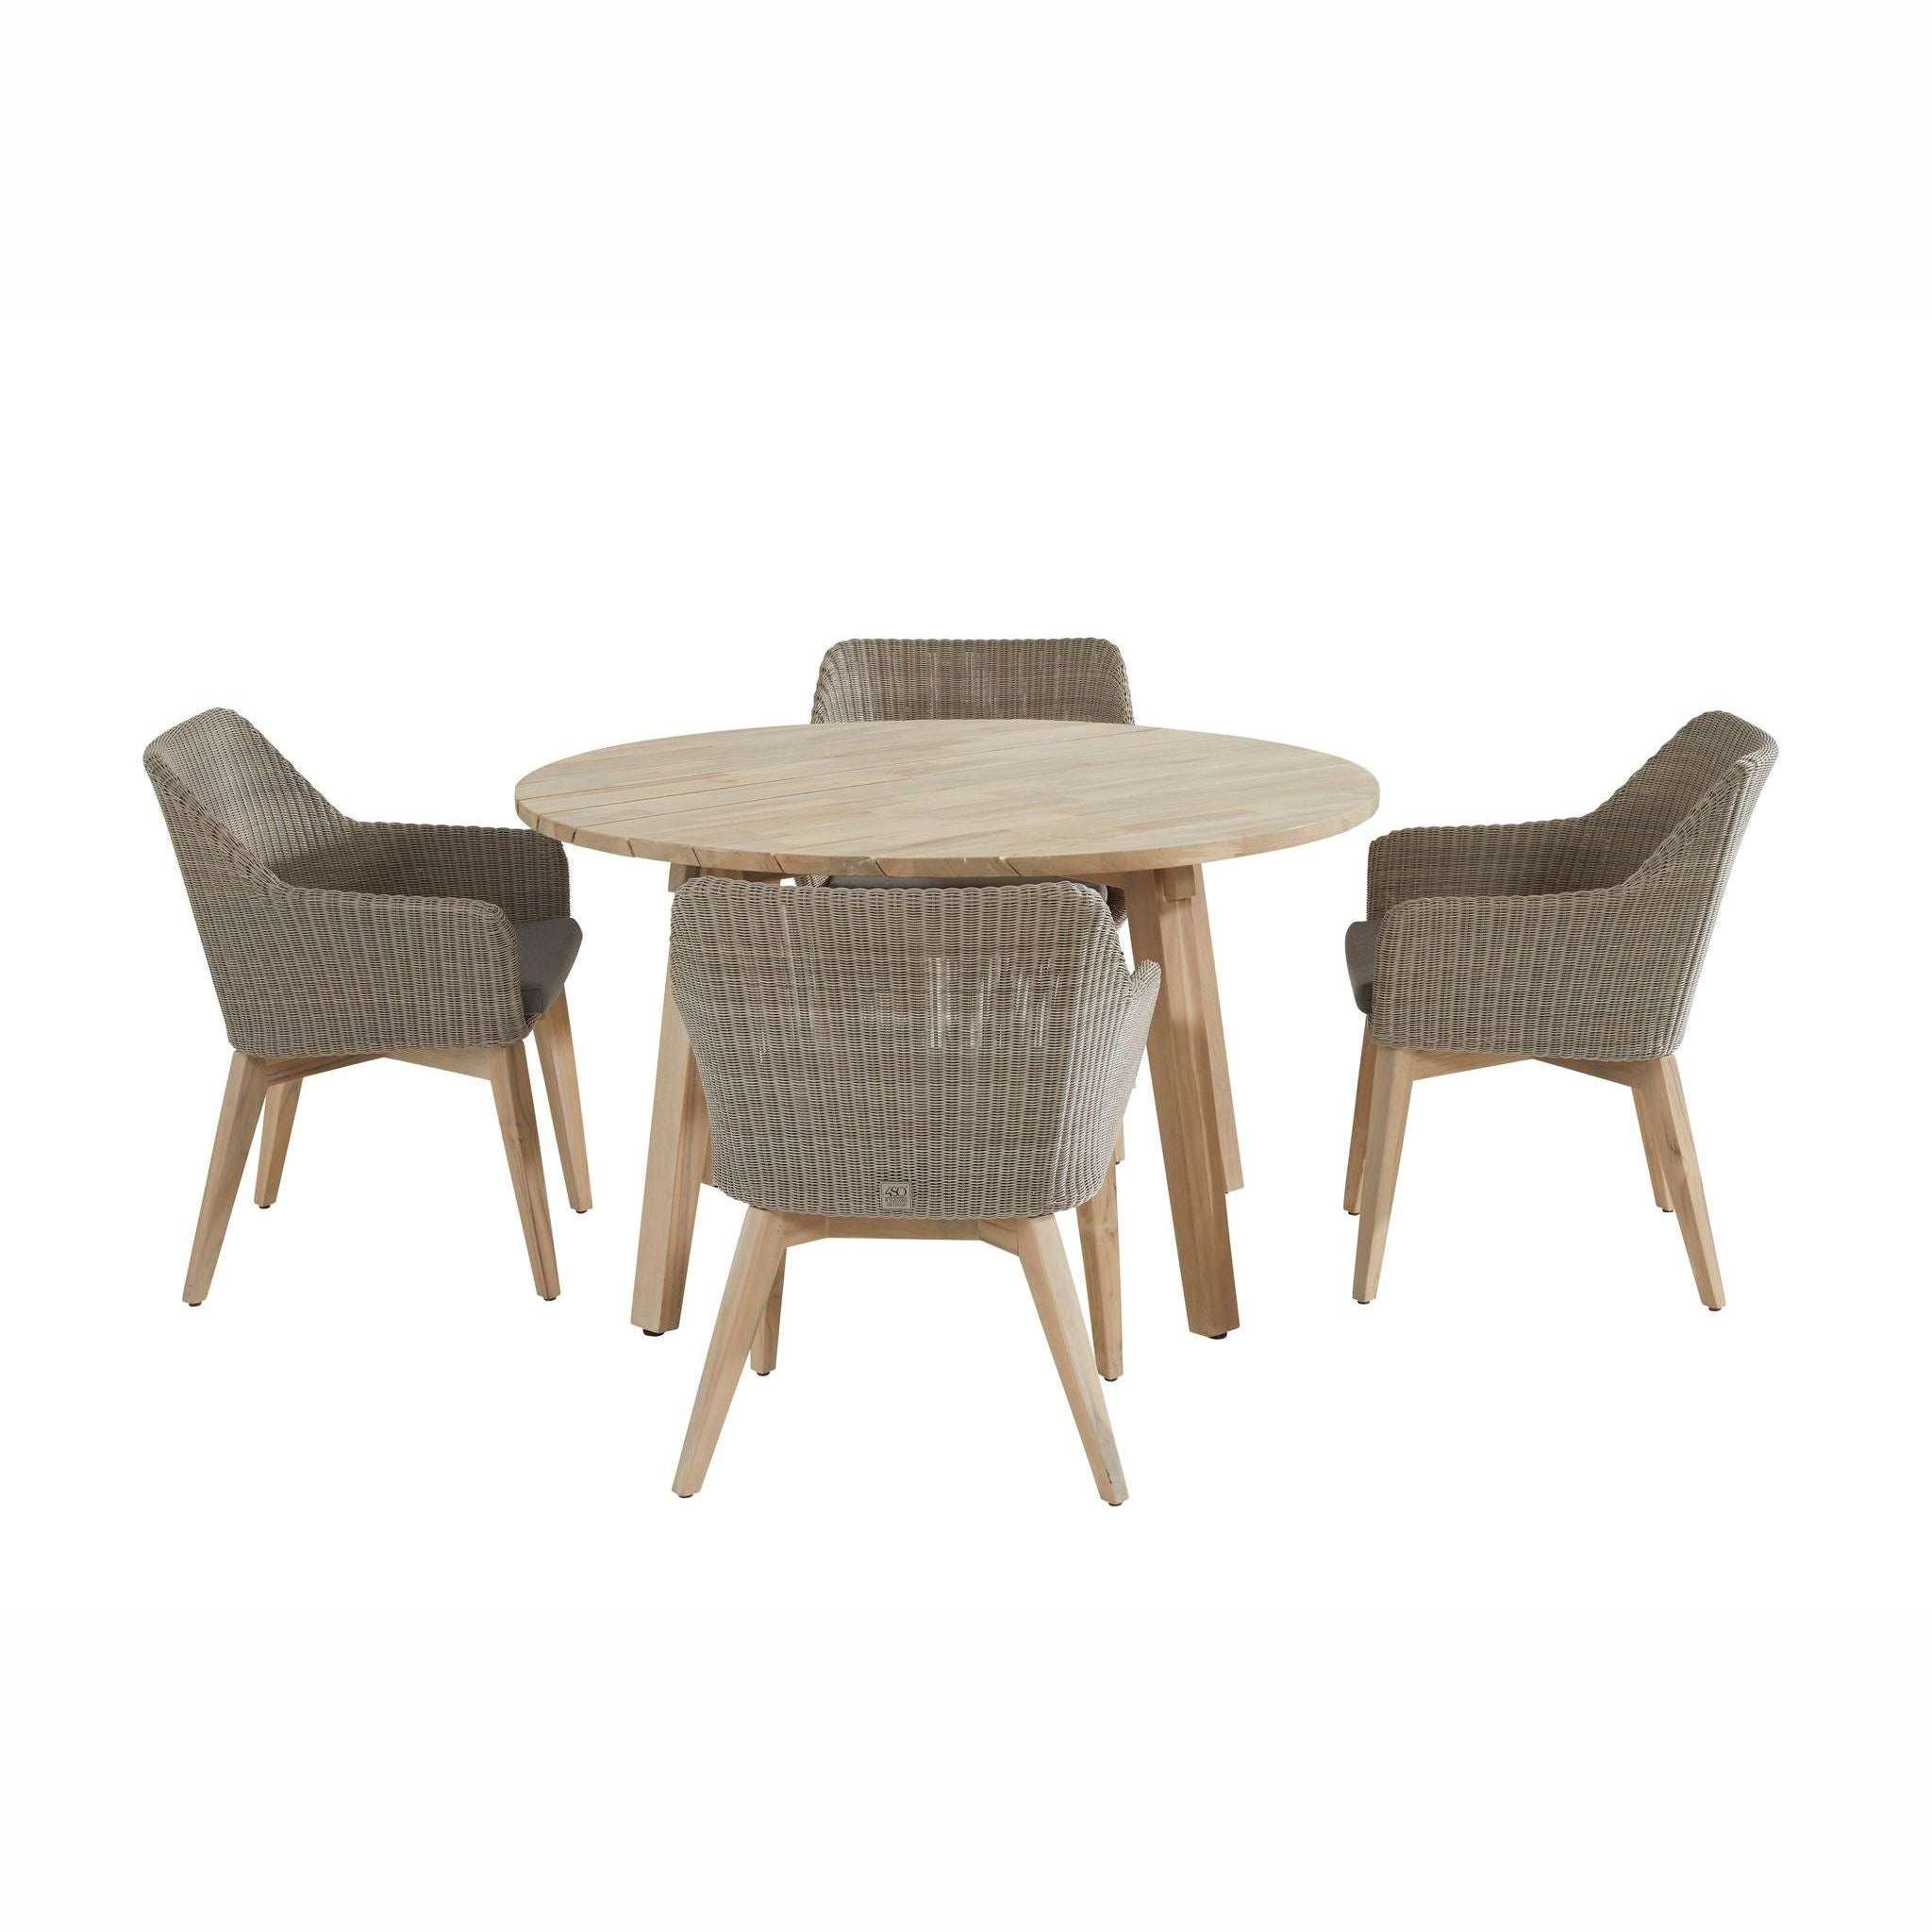 Exceptional Garden:4 Seasons Outdoor Avila 4 Seater dining set with 130cm Derby Teak Round Table